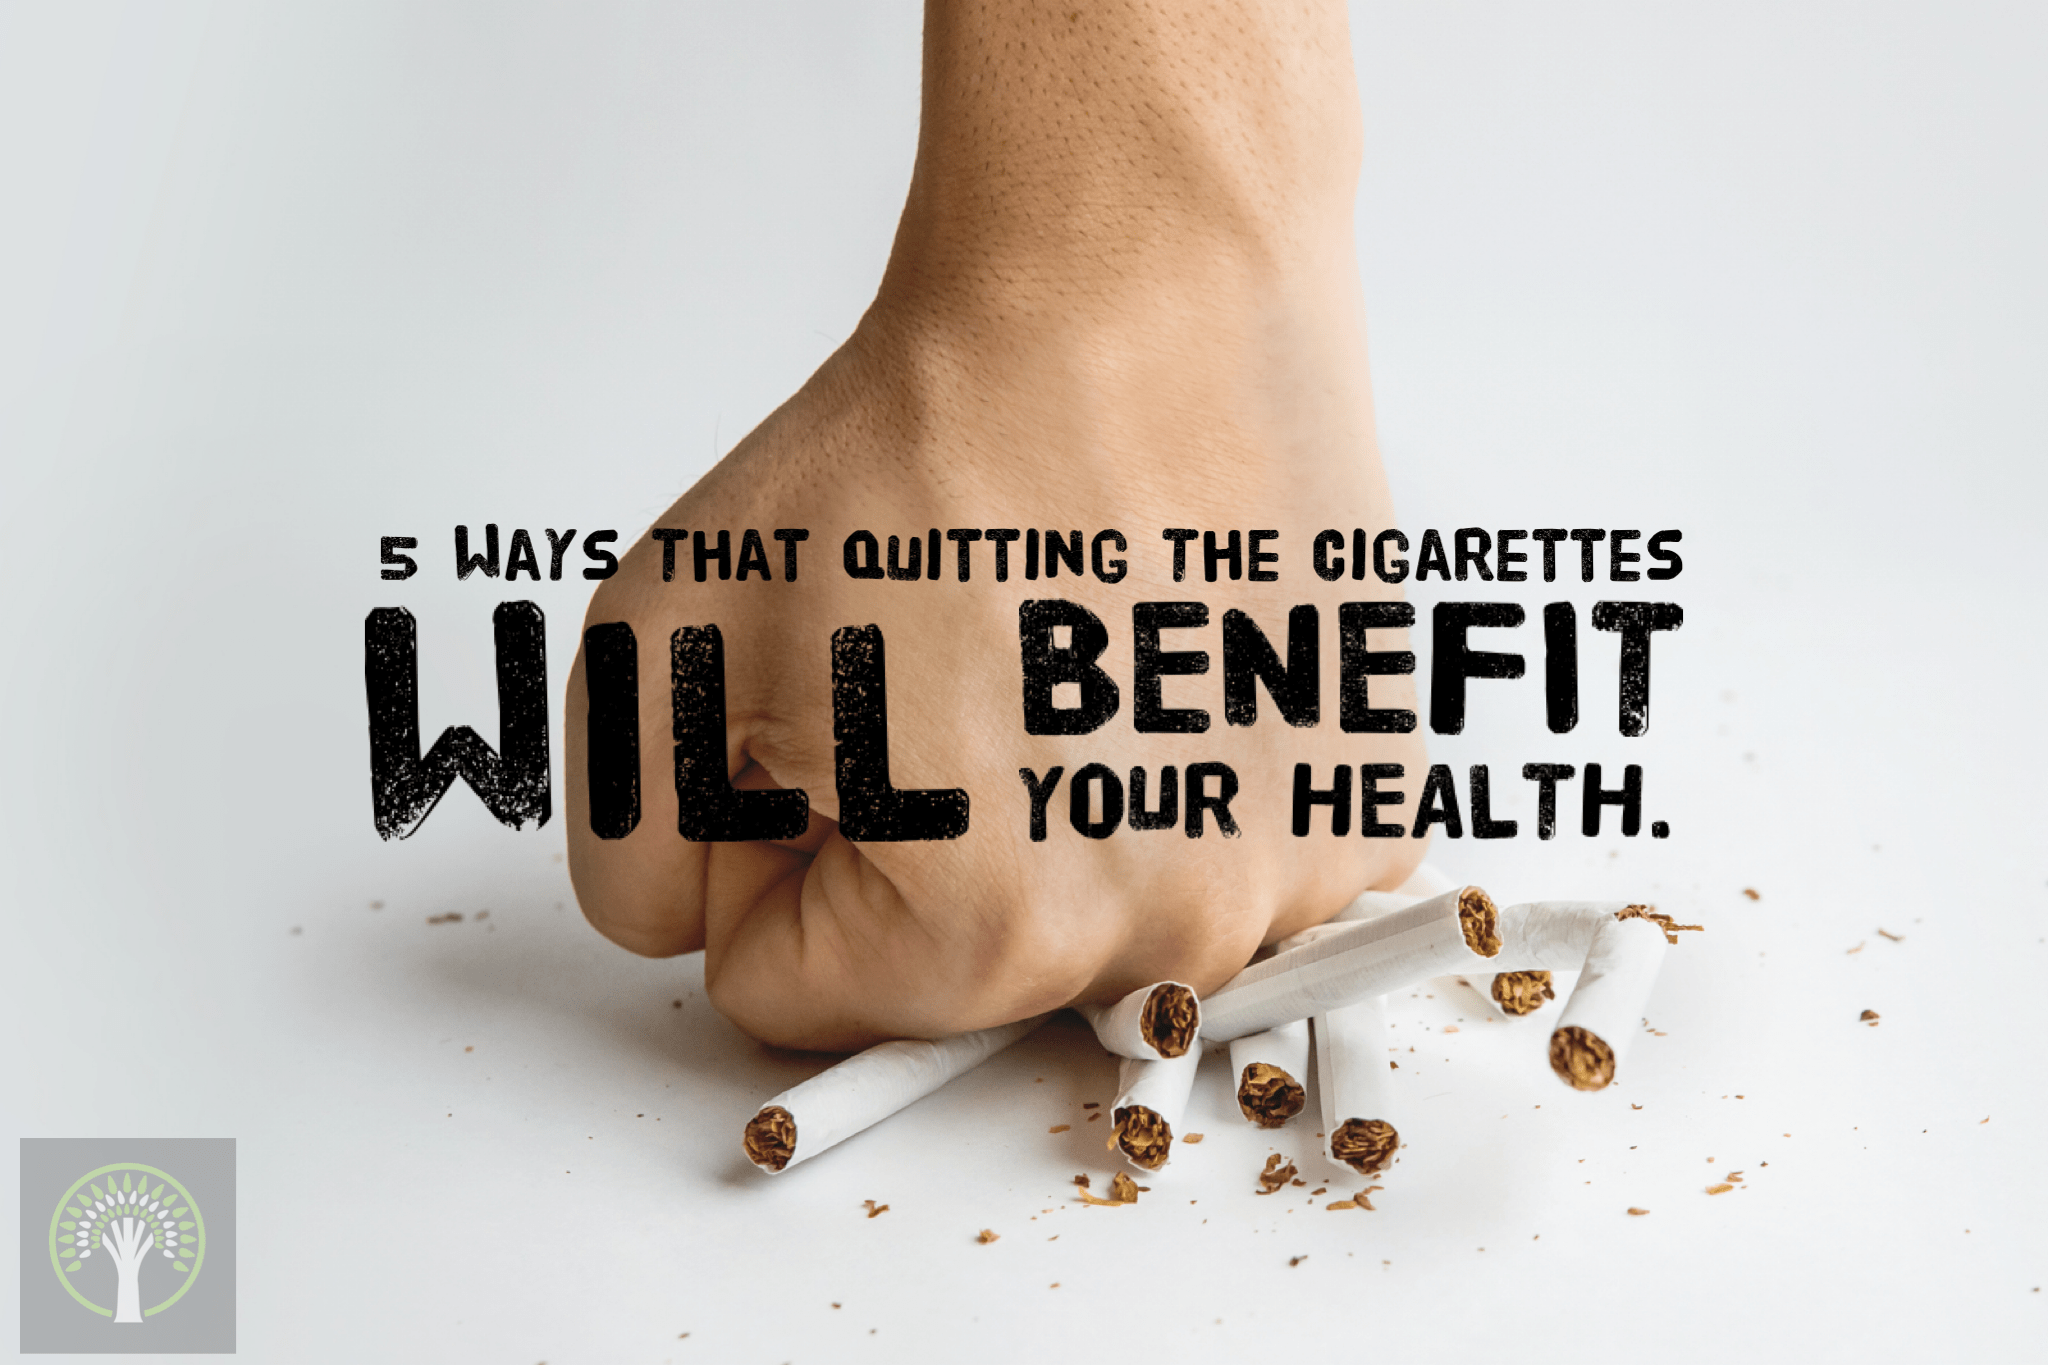 5 Ways That Quitting The Cigarettes Will Benefit Your Health!